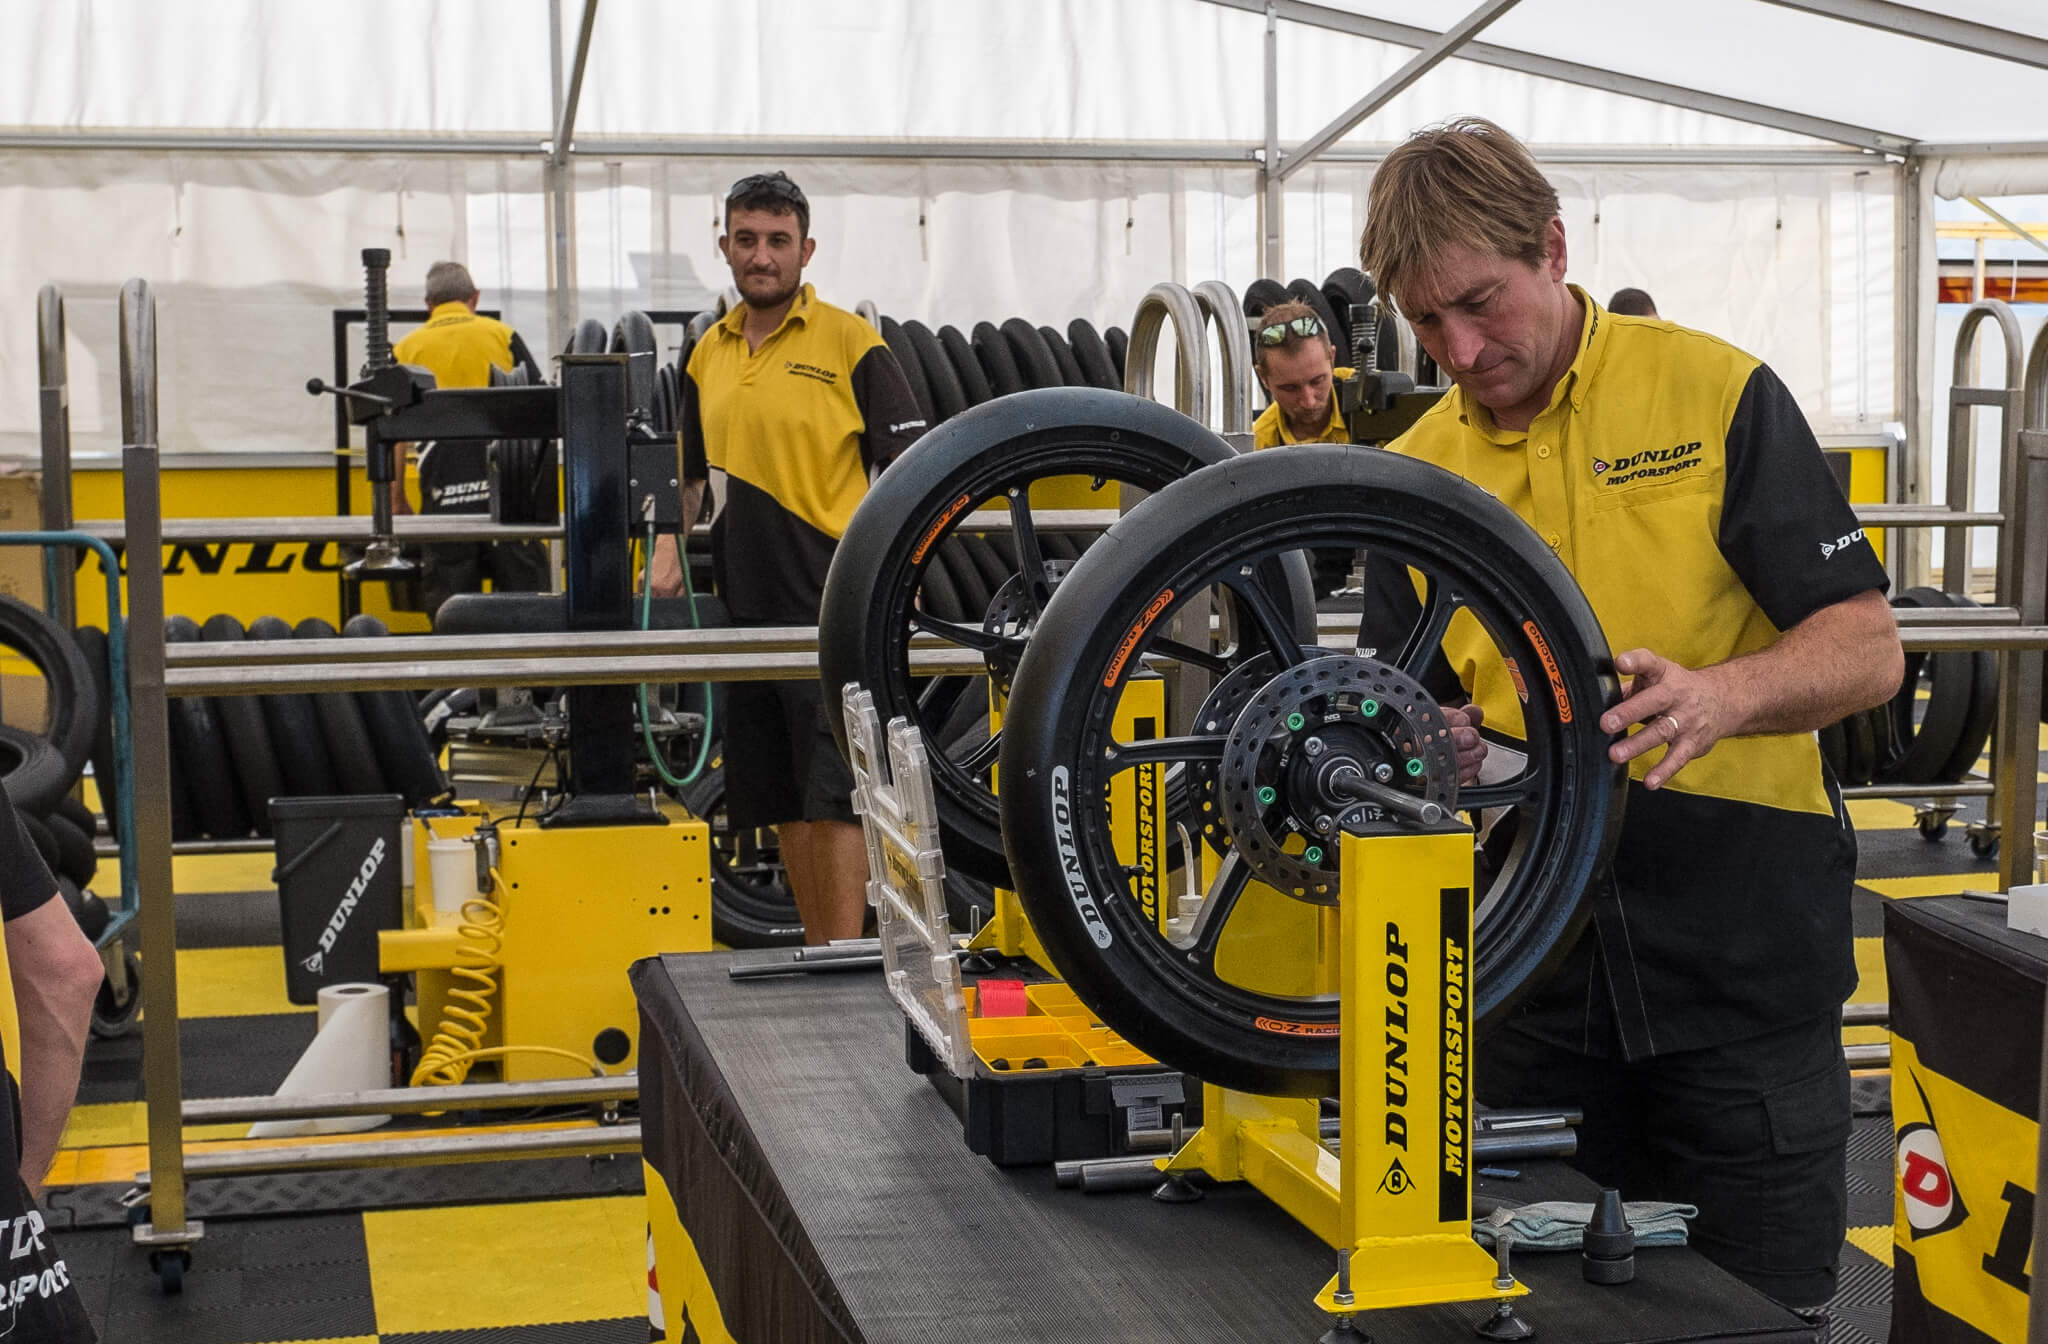 The Dunlop service center. Placing new tyres and balancing the wheels